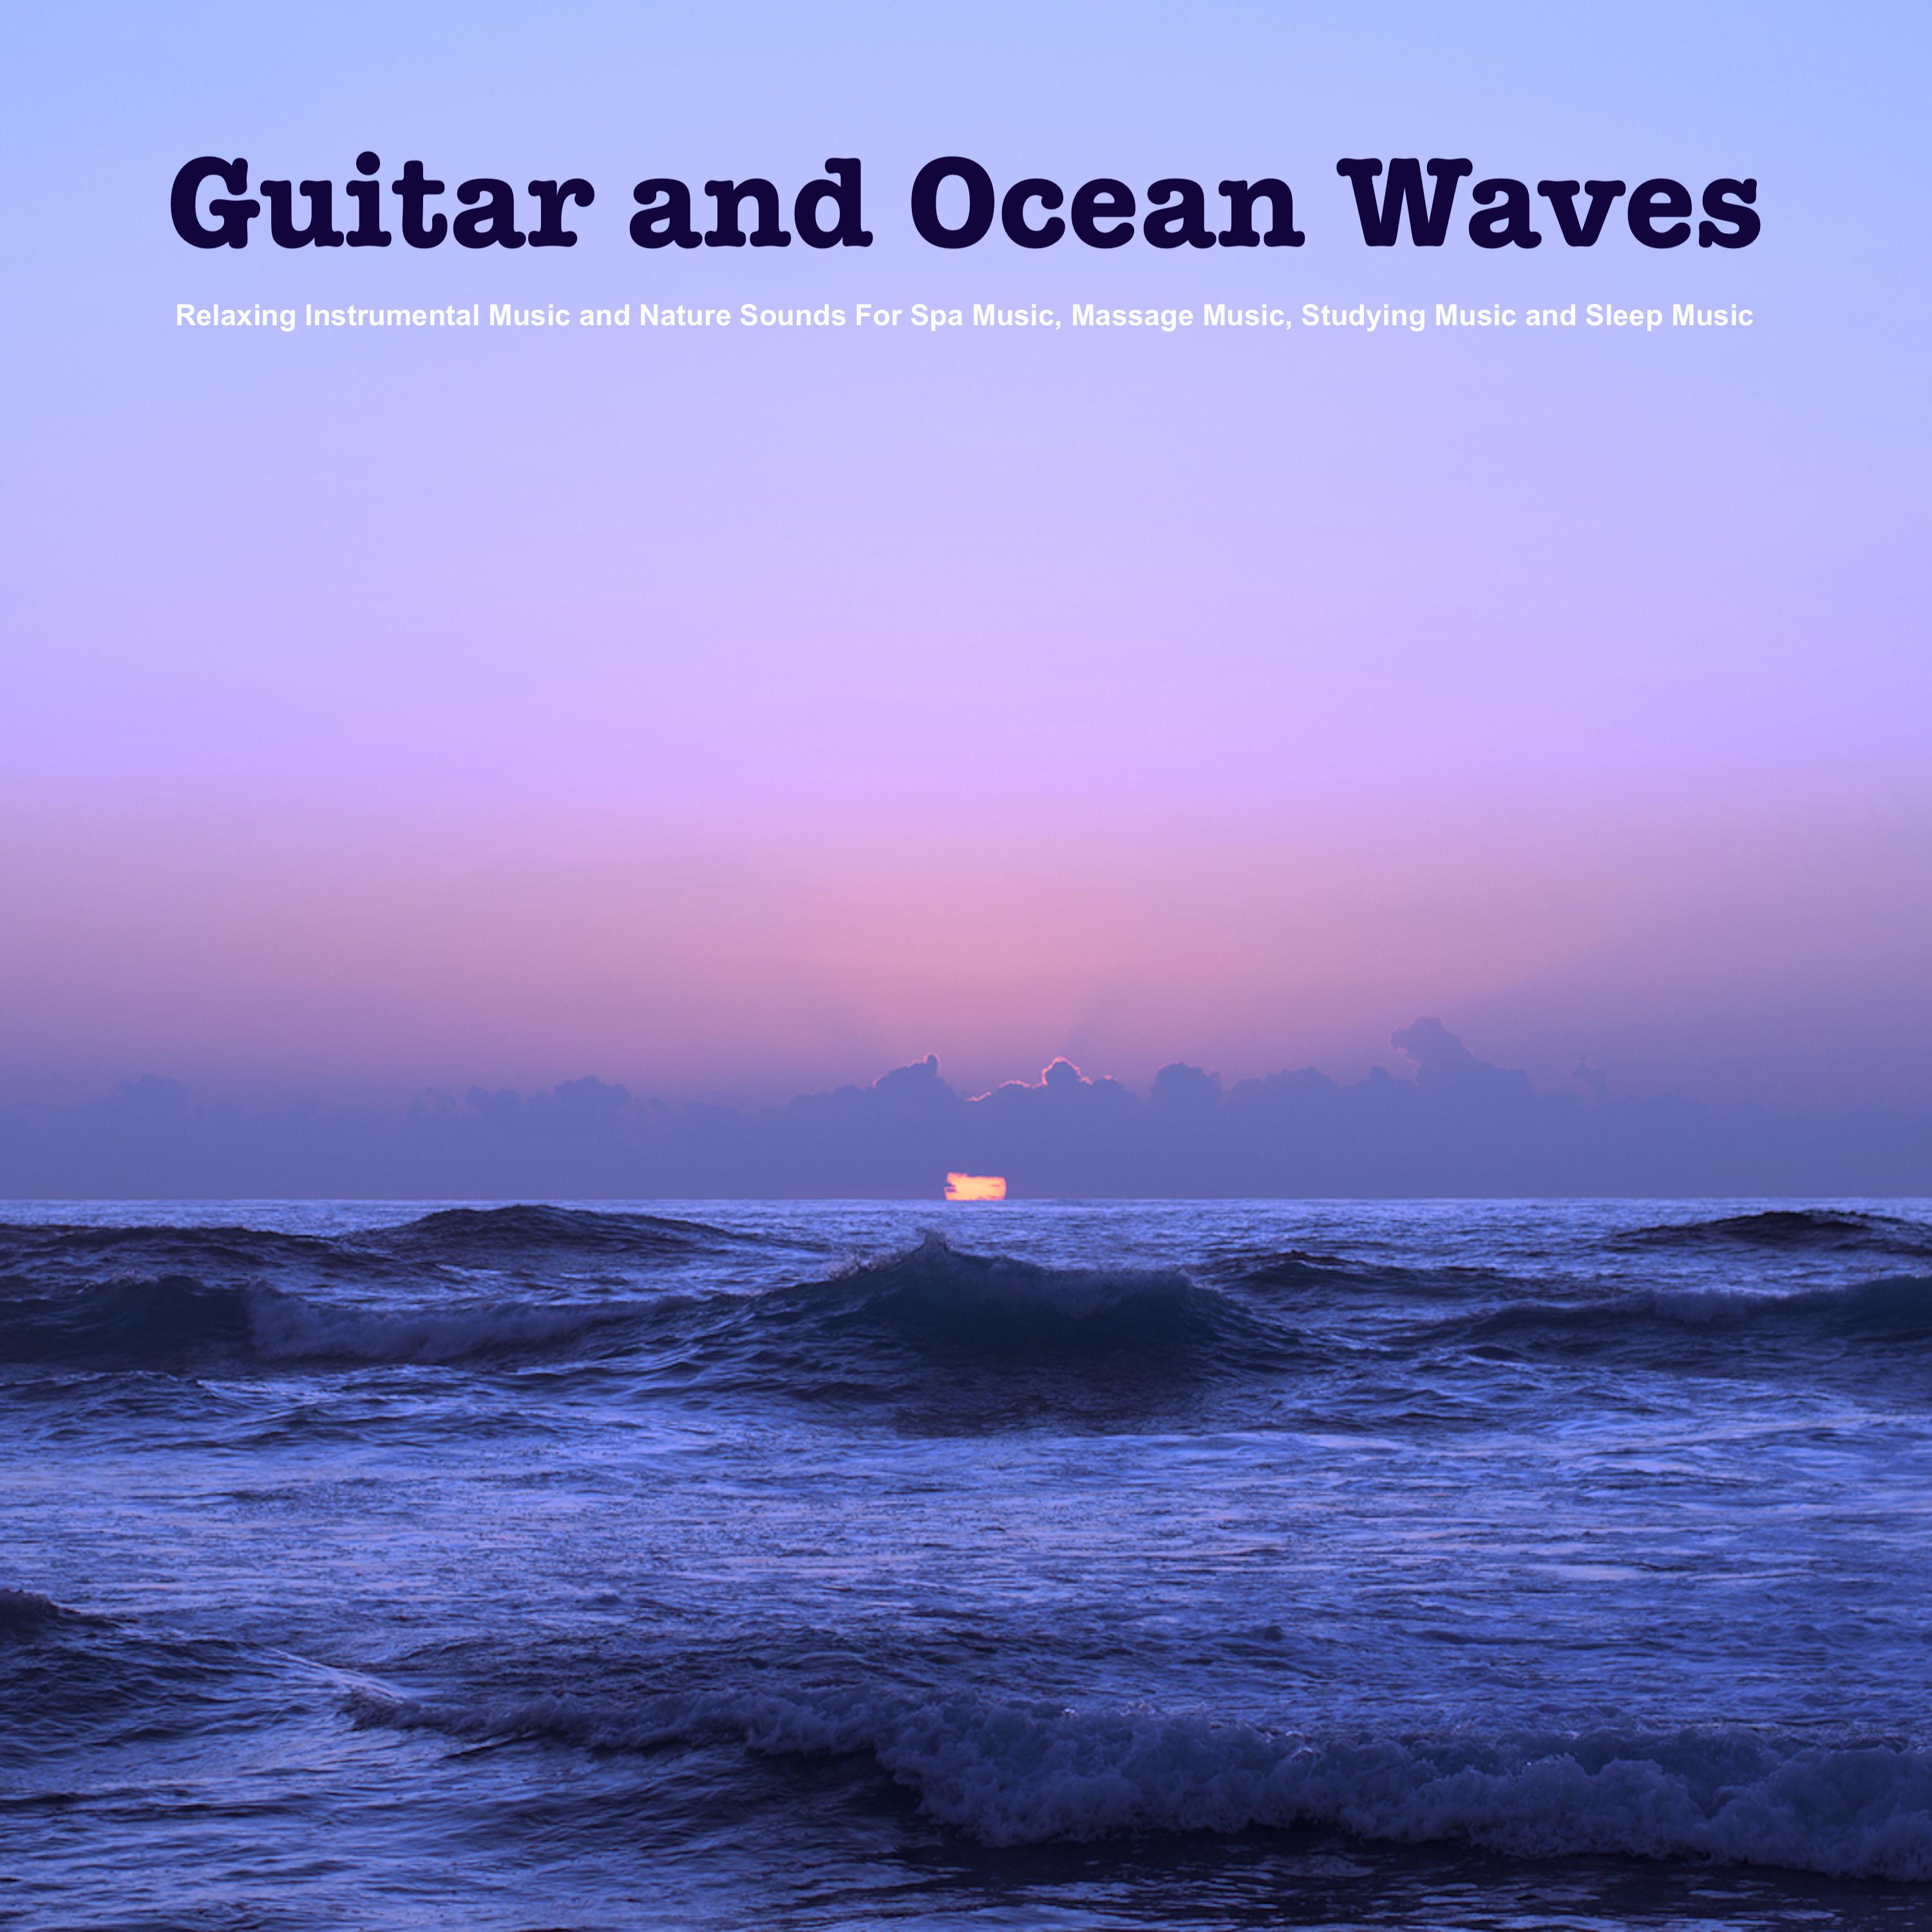 Guitar and Ocean Waves: Relaxing Instrumental Music and Nature Sounds For Spa Music, Massage Music, Studying Music and Sleep Music